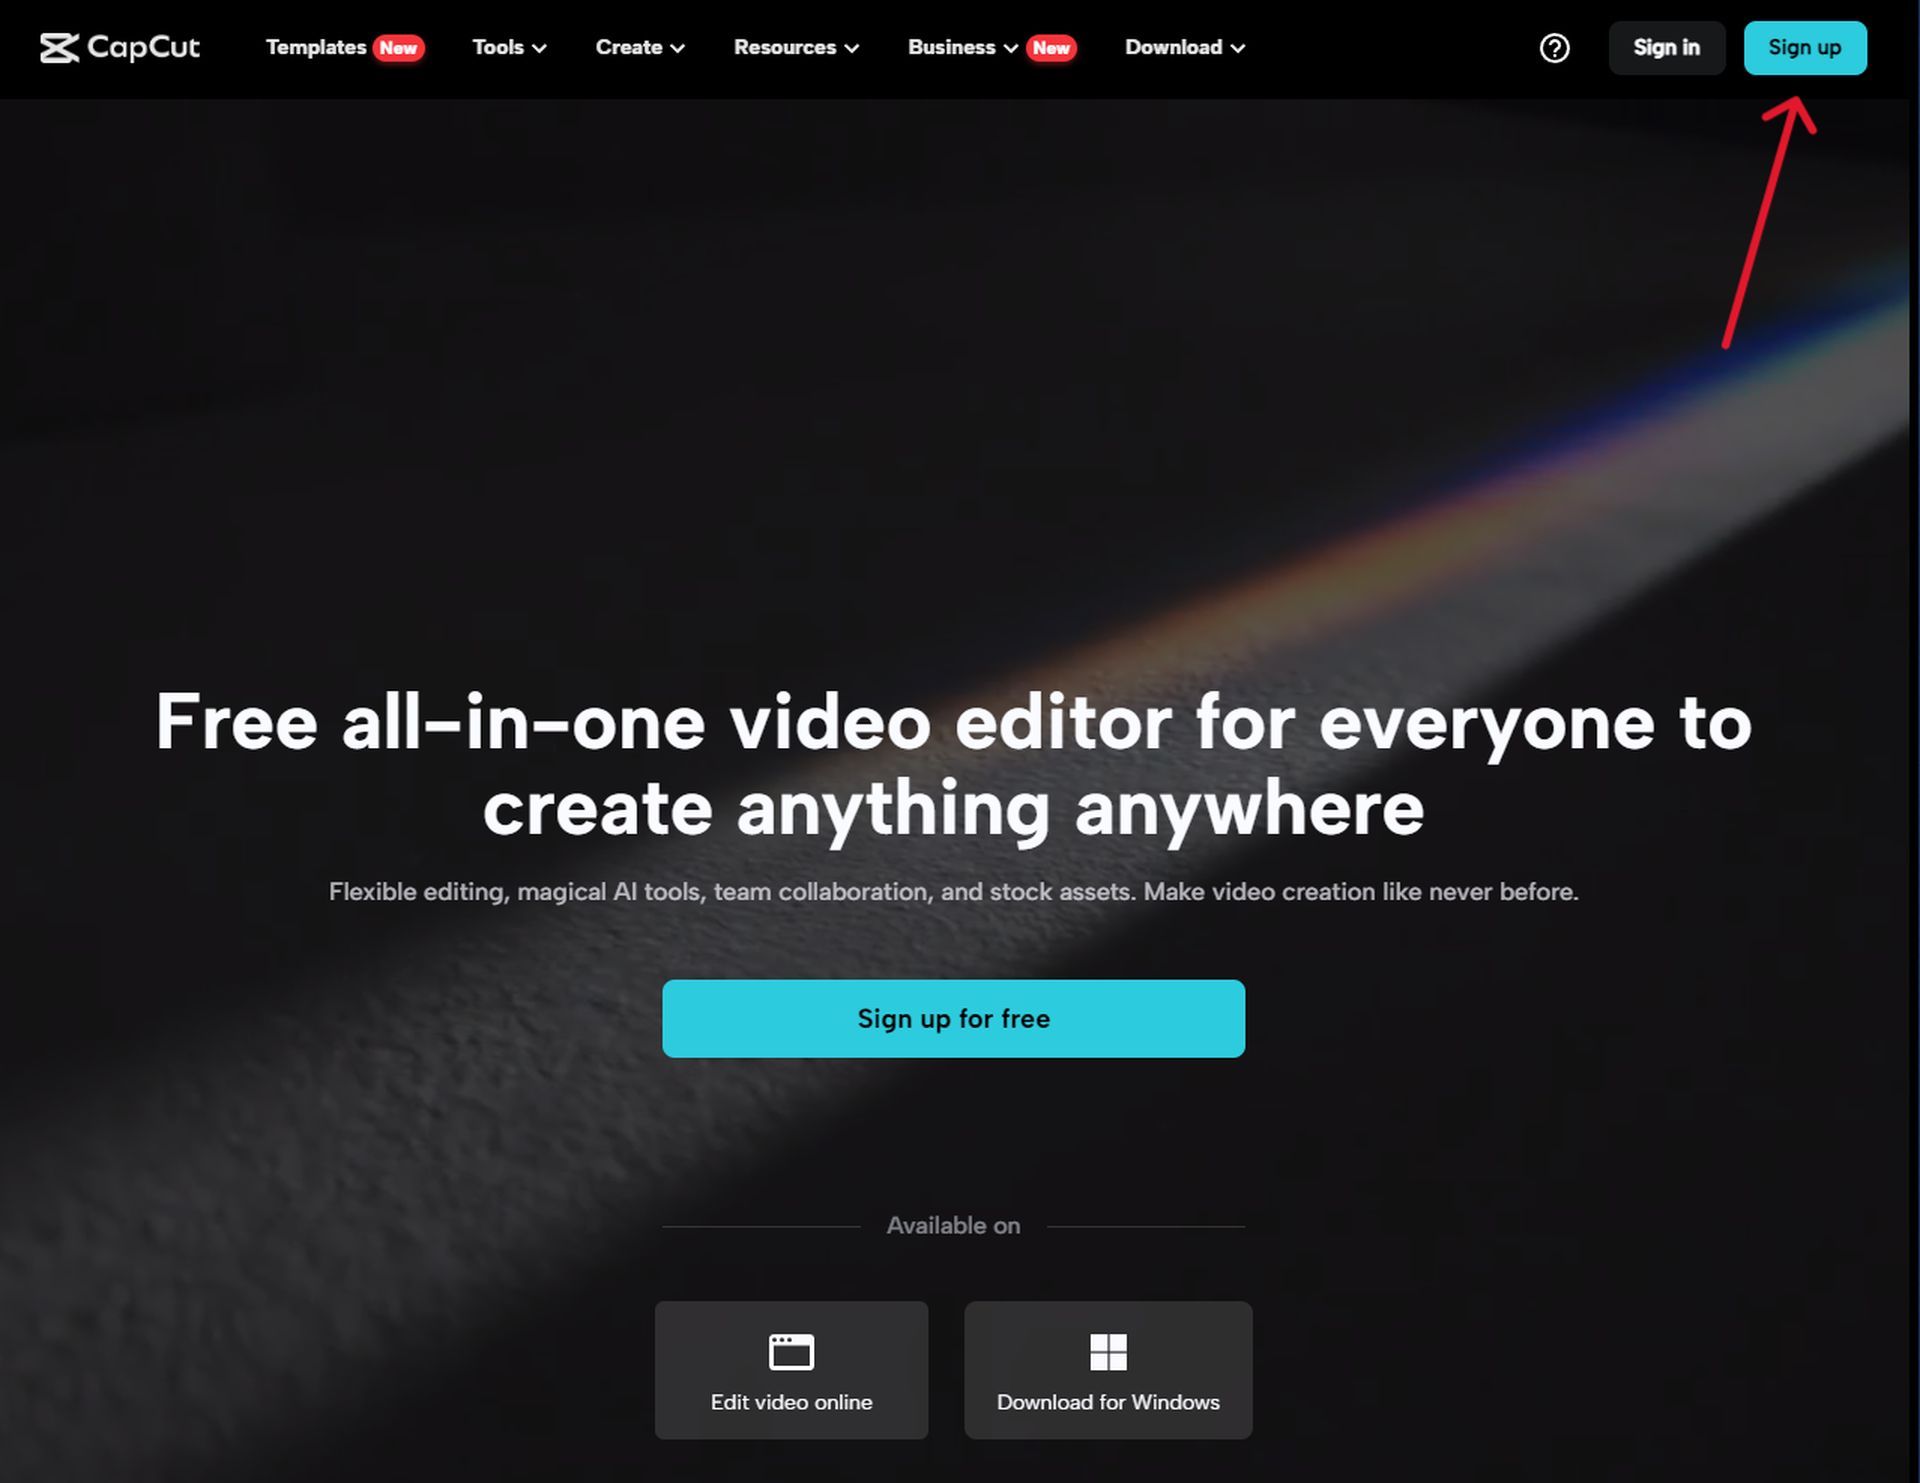 CapCut Online Photo & Video Editor: An advanced tool for beginners